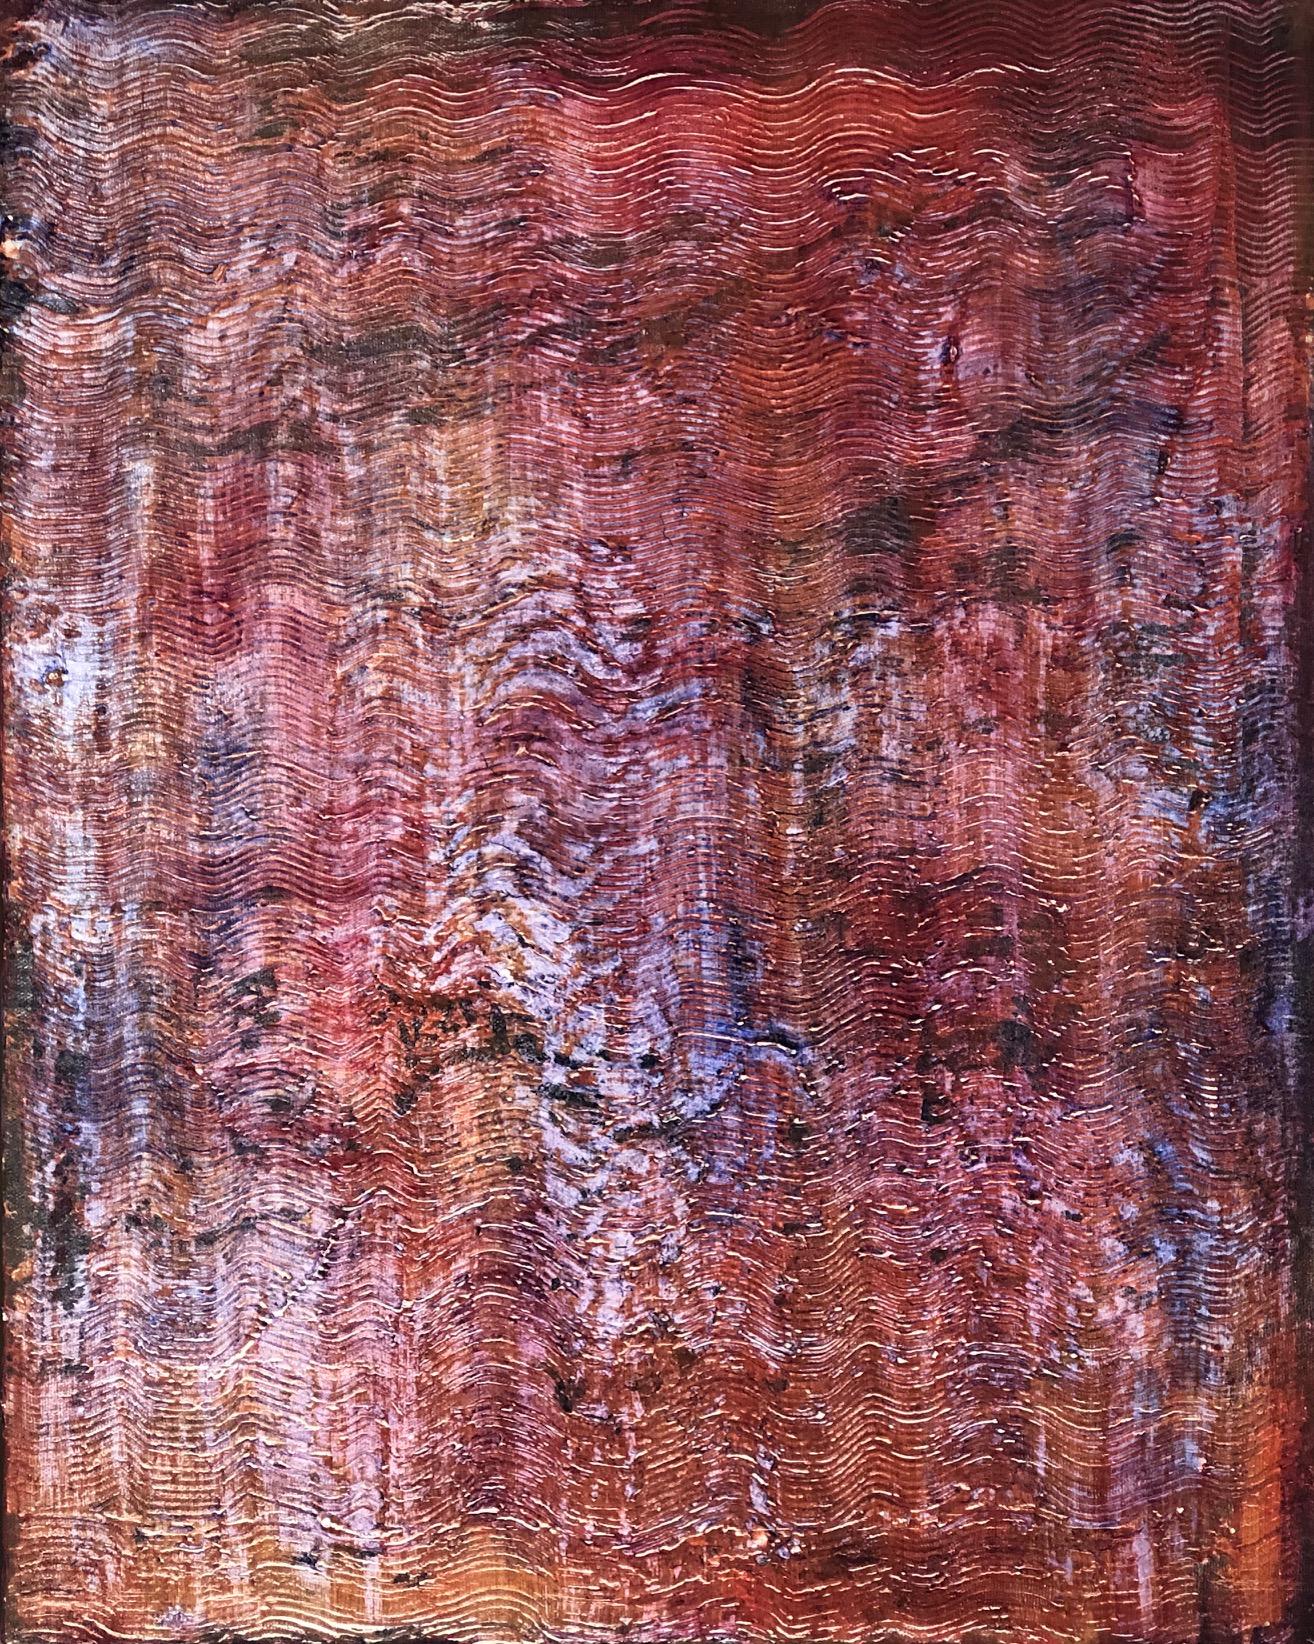 "Untitled - Pink Waves" one of a 12 painting grid of textured paintings - pink